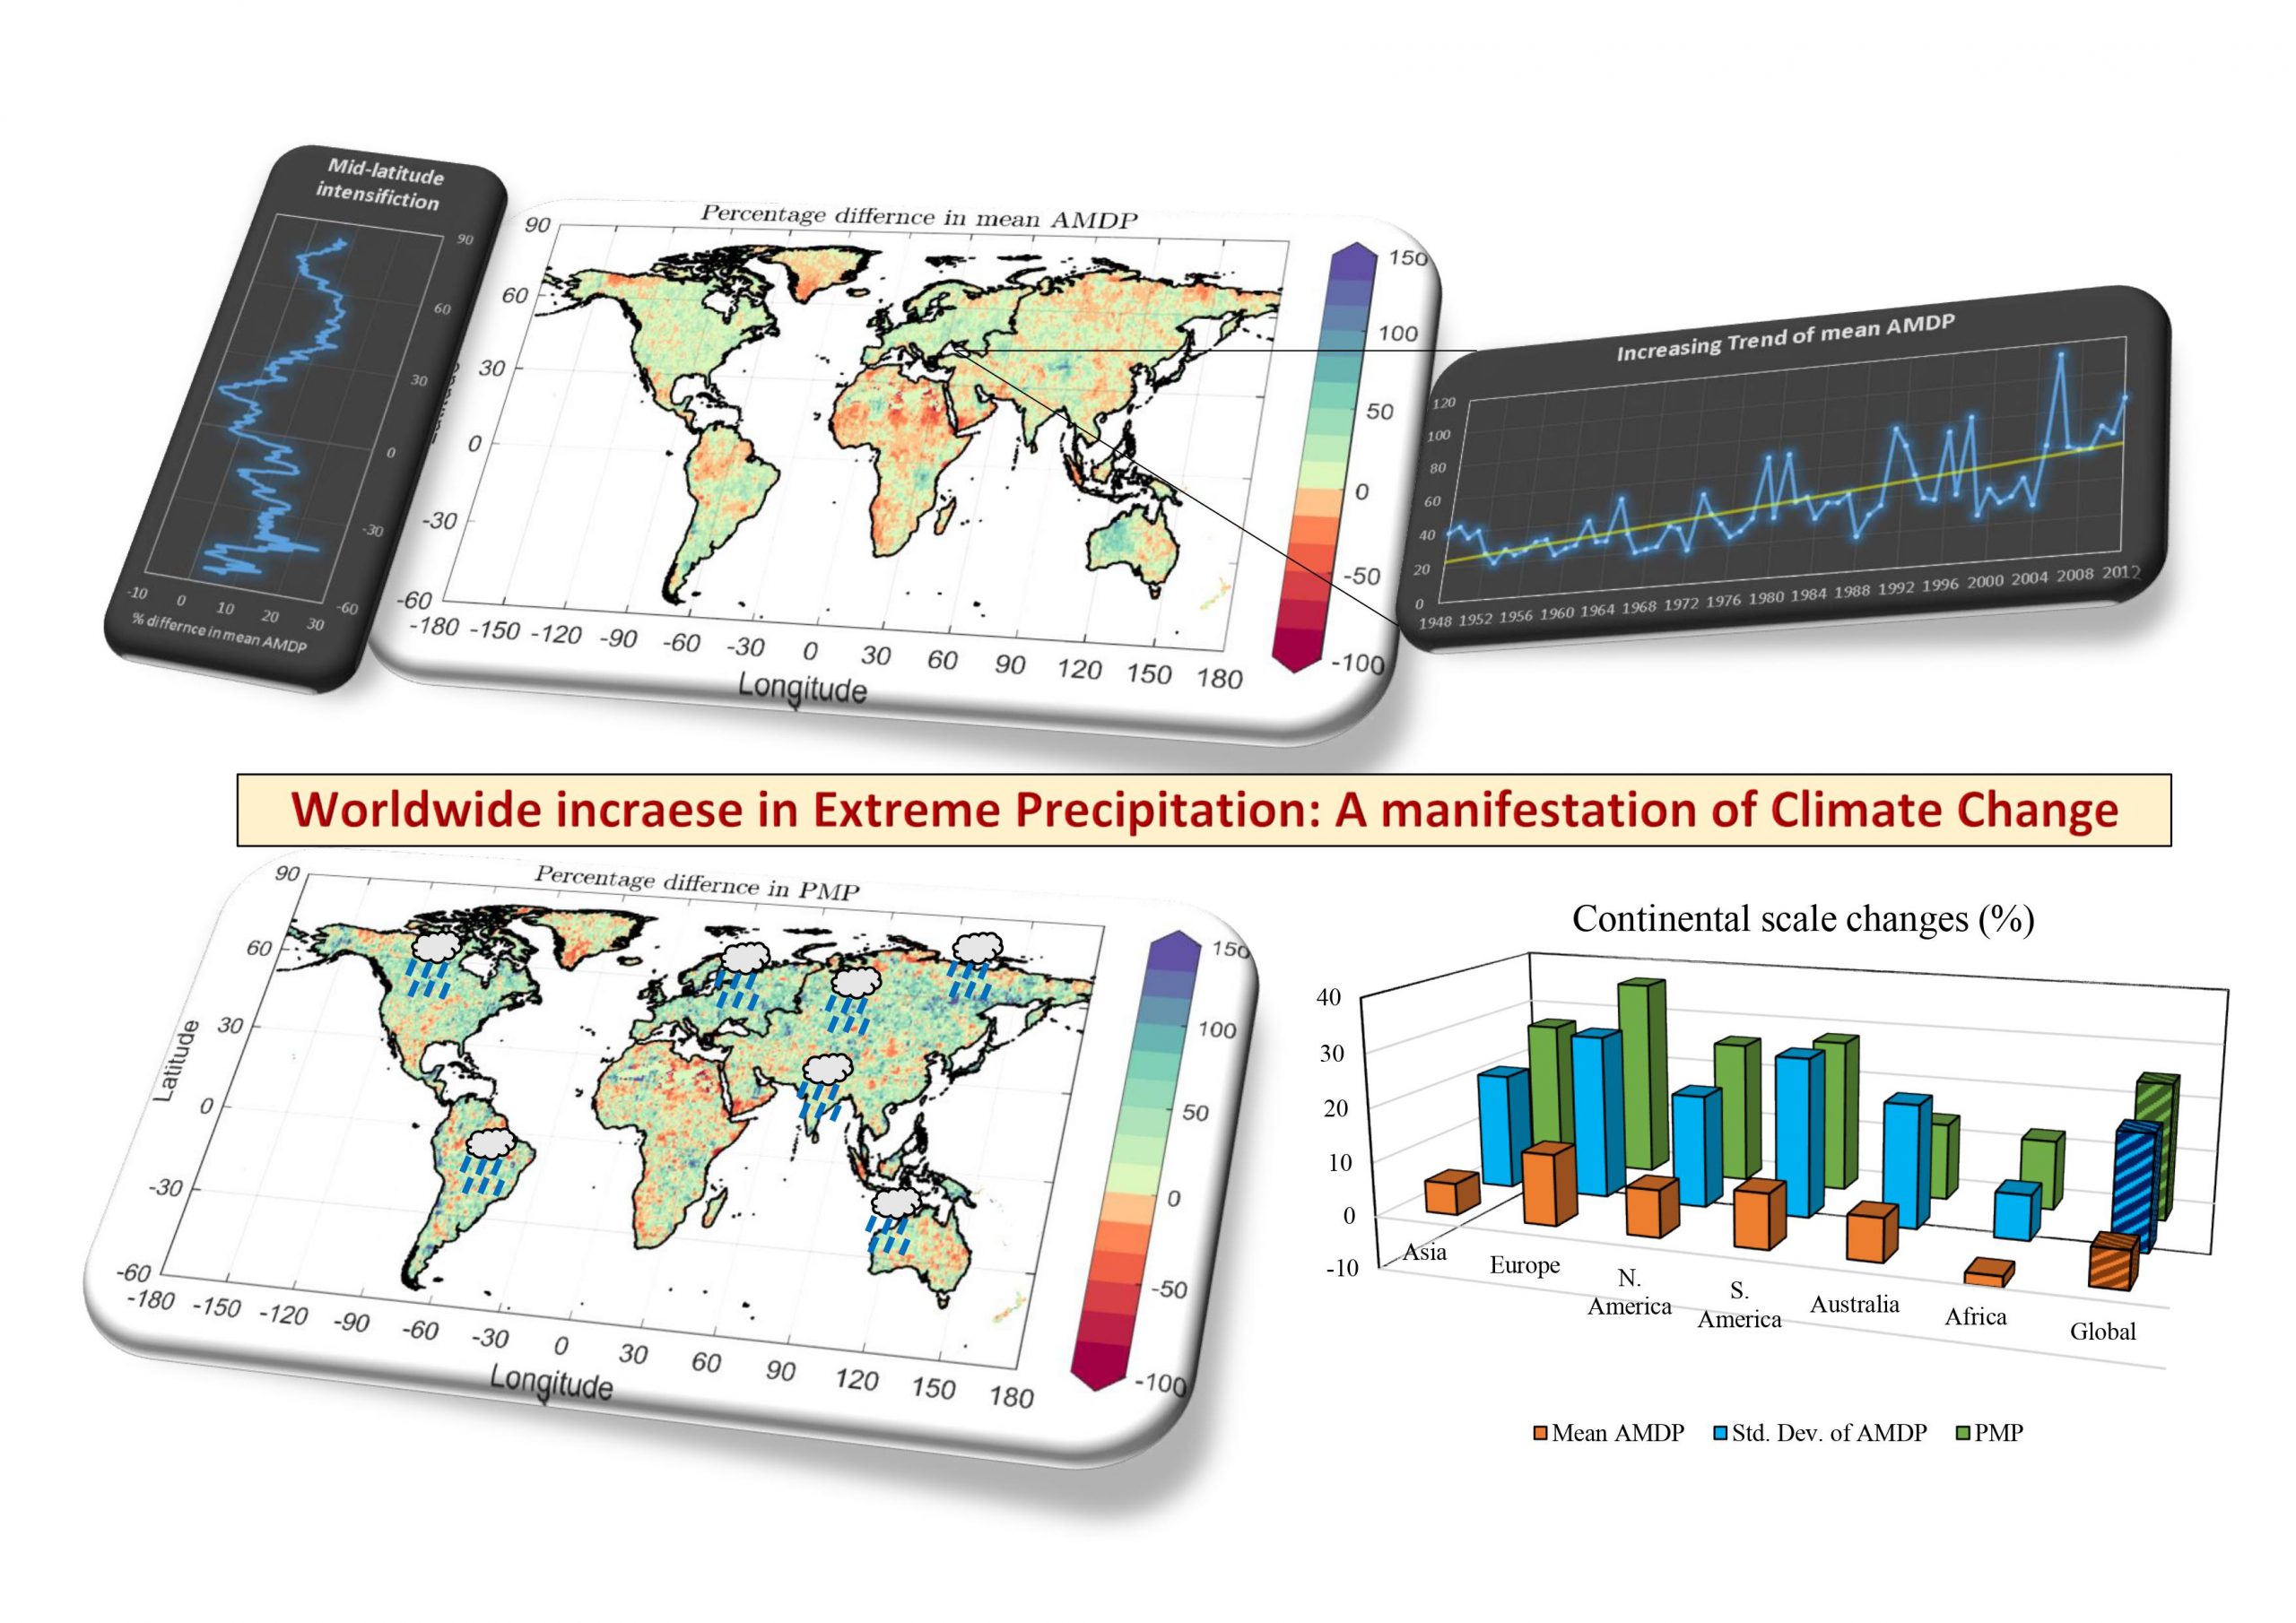 Worldwide increase in extreme precipitation: A manifestation of climate change